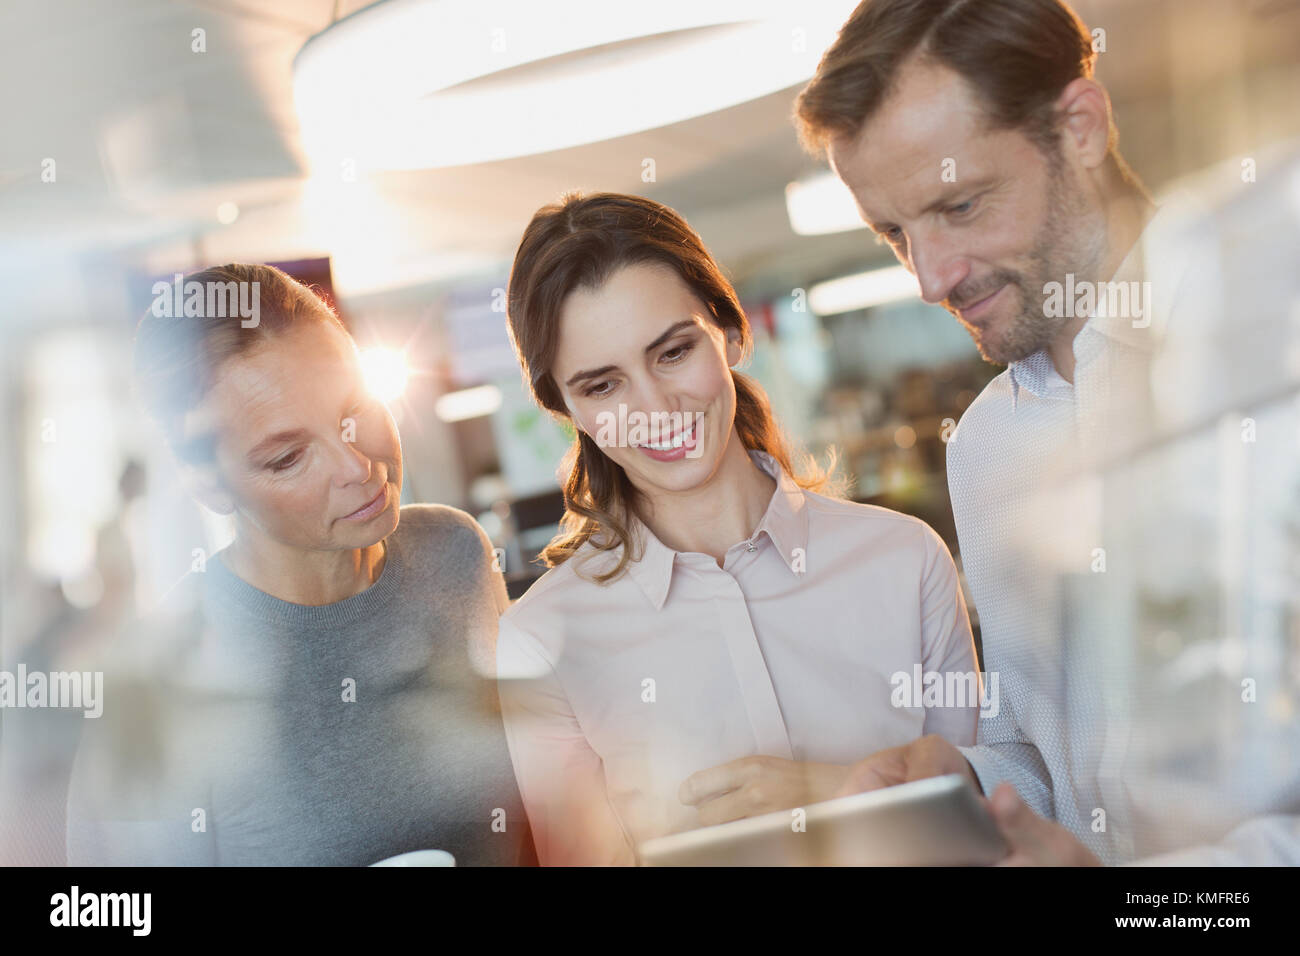 Business people using digital tablet in office Banque D'Images